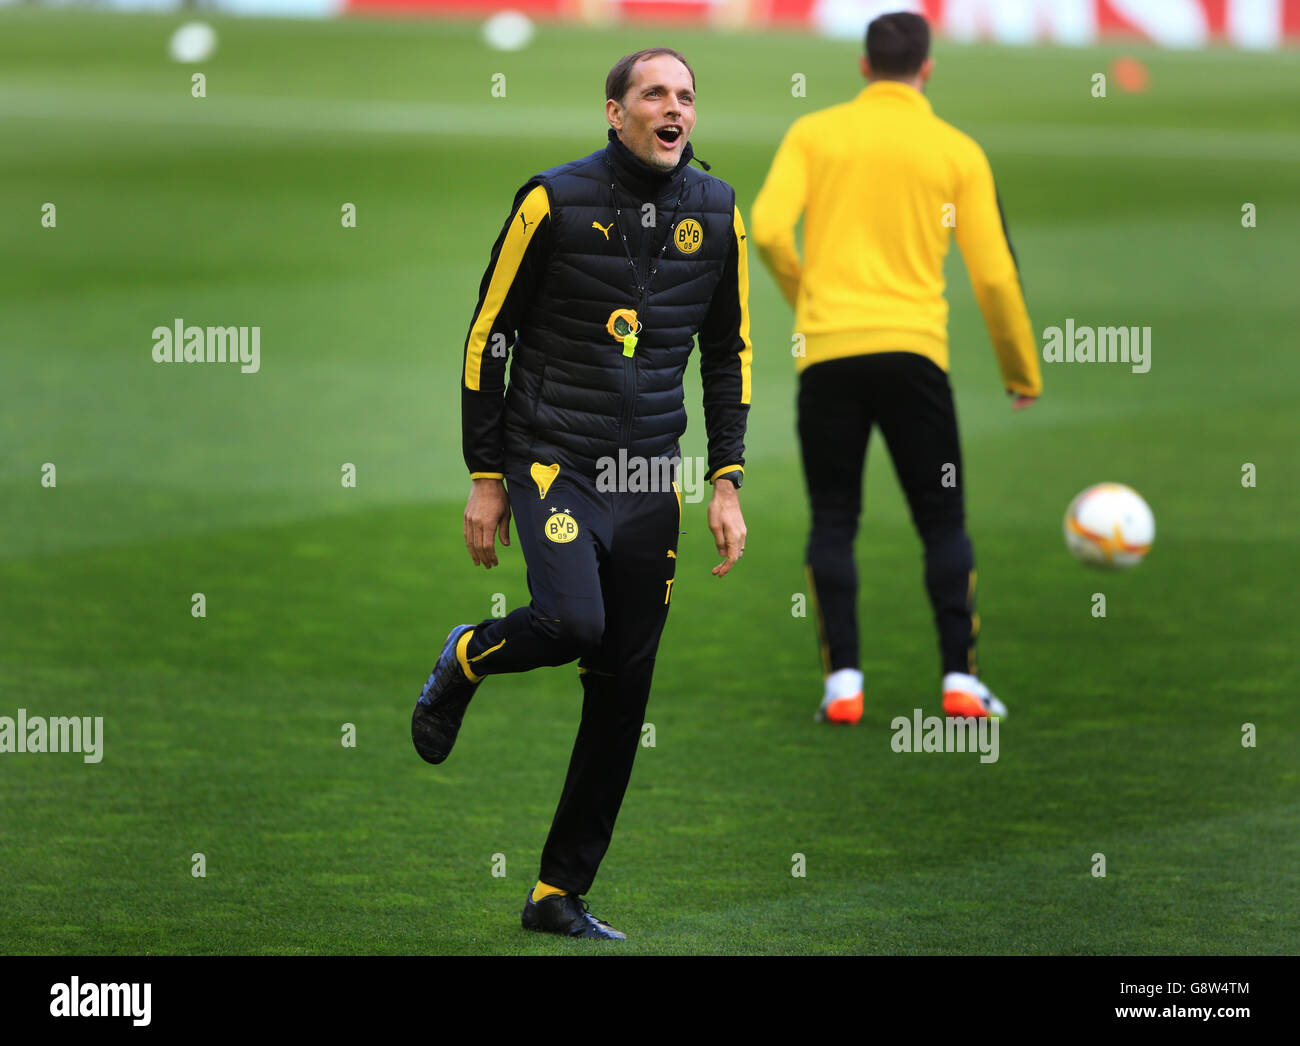 Borussia Dortmund head coach Thomas Tuchel shares a joke with his coaching staff during a training session at Anfield, Liverpool. Stock Photo